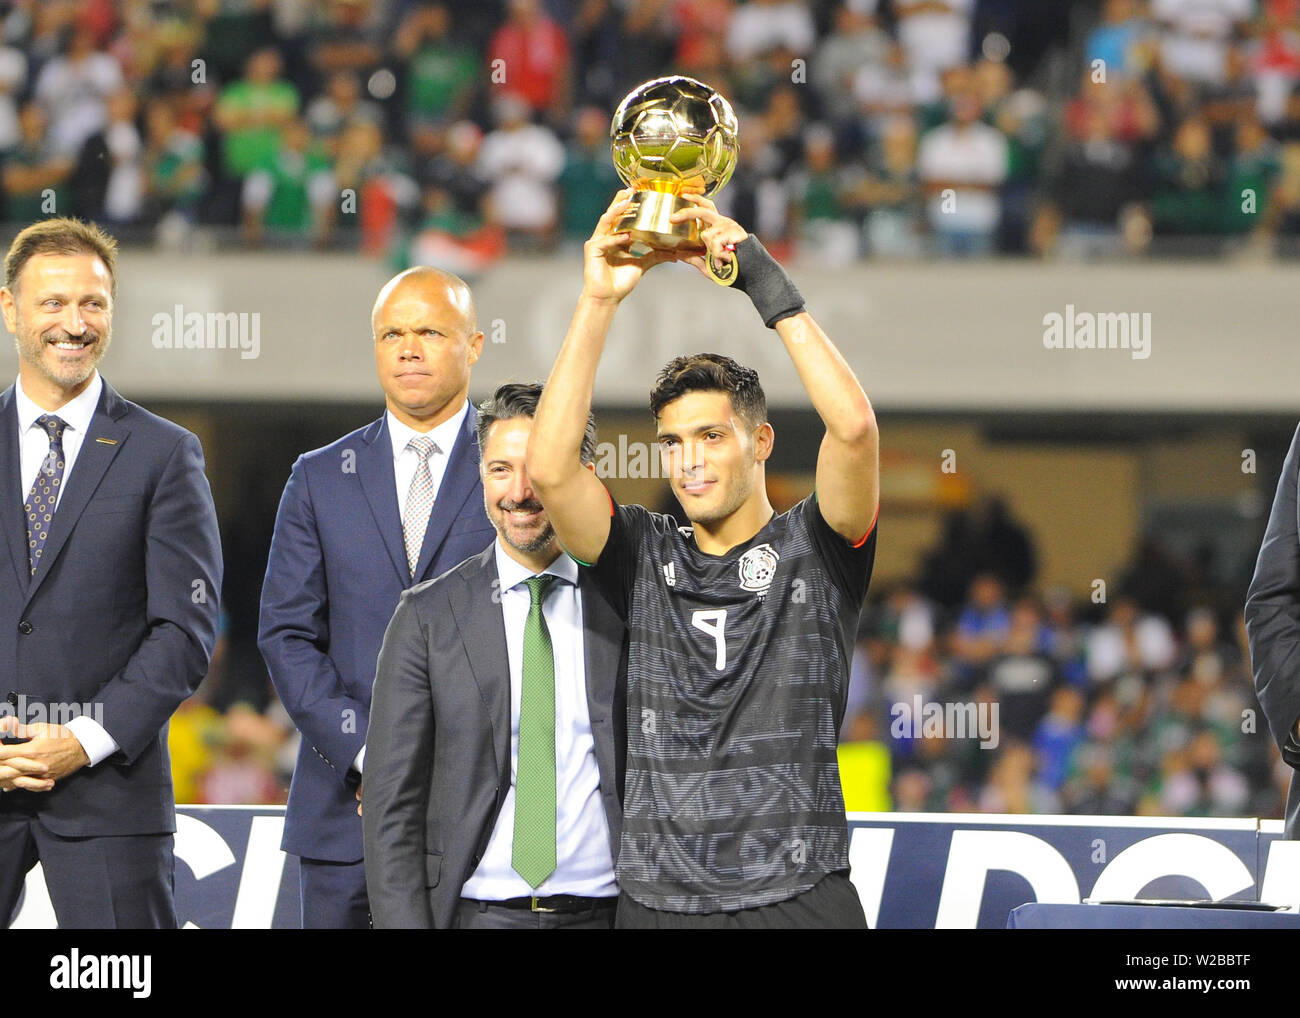 Chicago, IL, USA. 07th July, 2019. Mexico forward, Raul Jimenez (9), shows his award after the 2019 CONCACAF Gold Cup, championship match, between the United States and Mexico, at Soldier Field in Chicago, IL. Credit: Kevin Langley/CSM/Alamy Live News Stock Photo